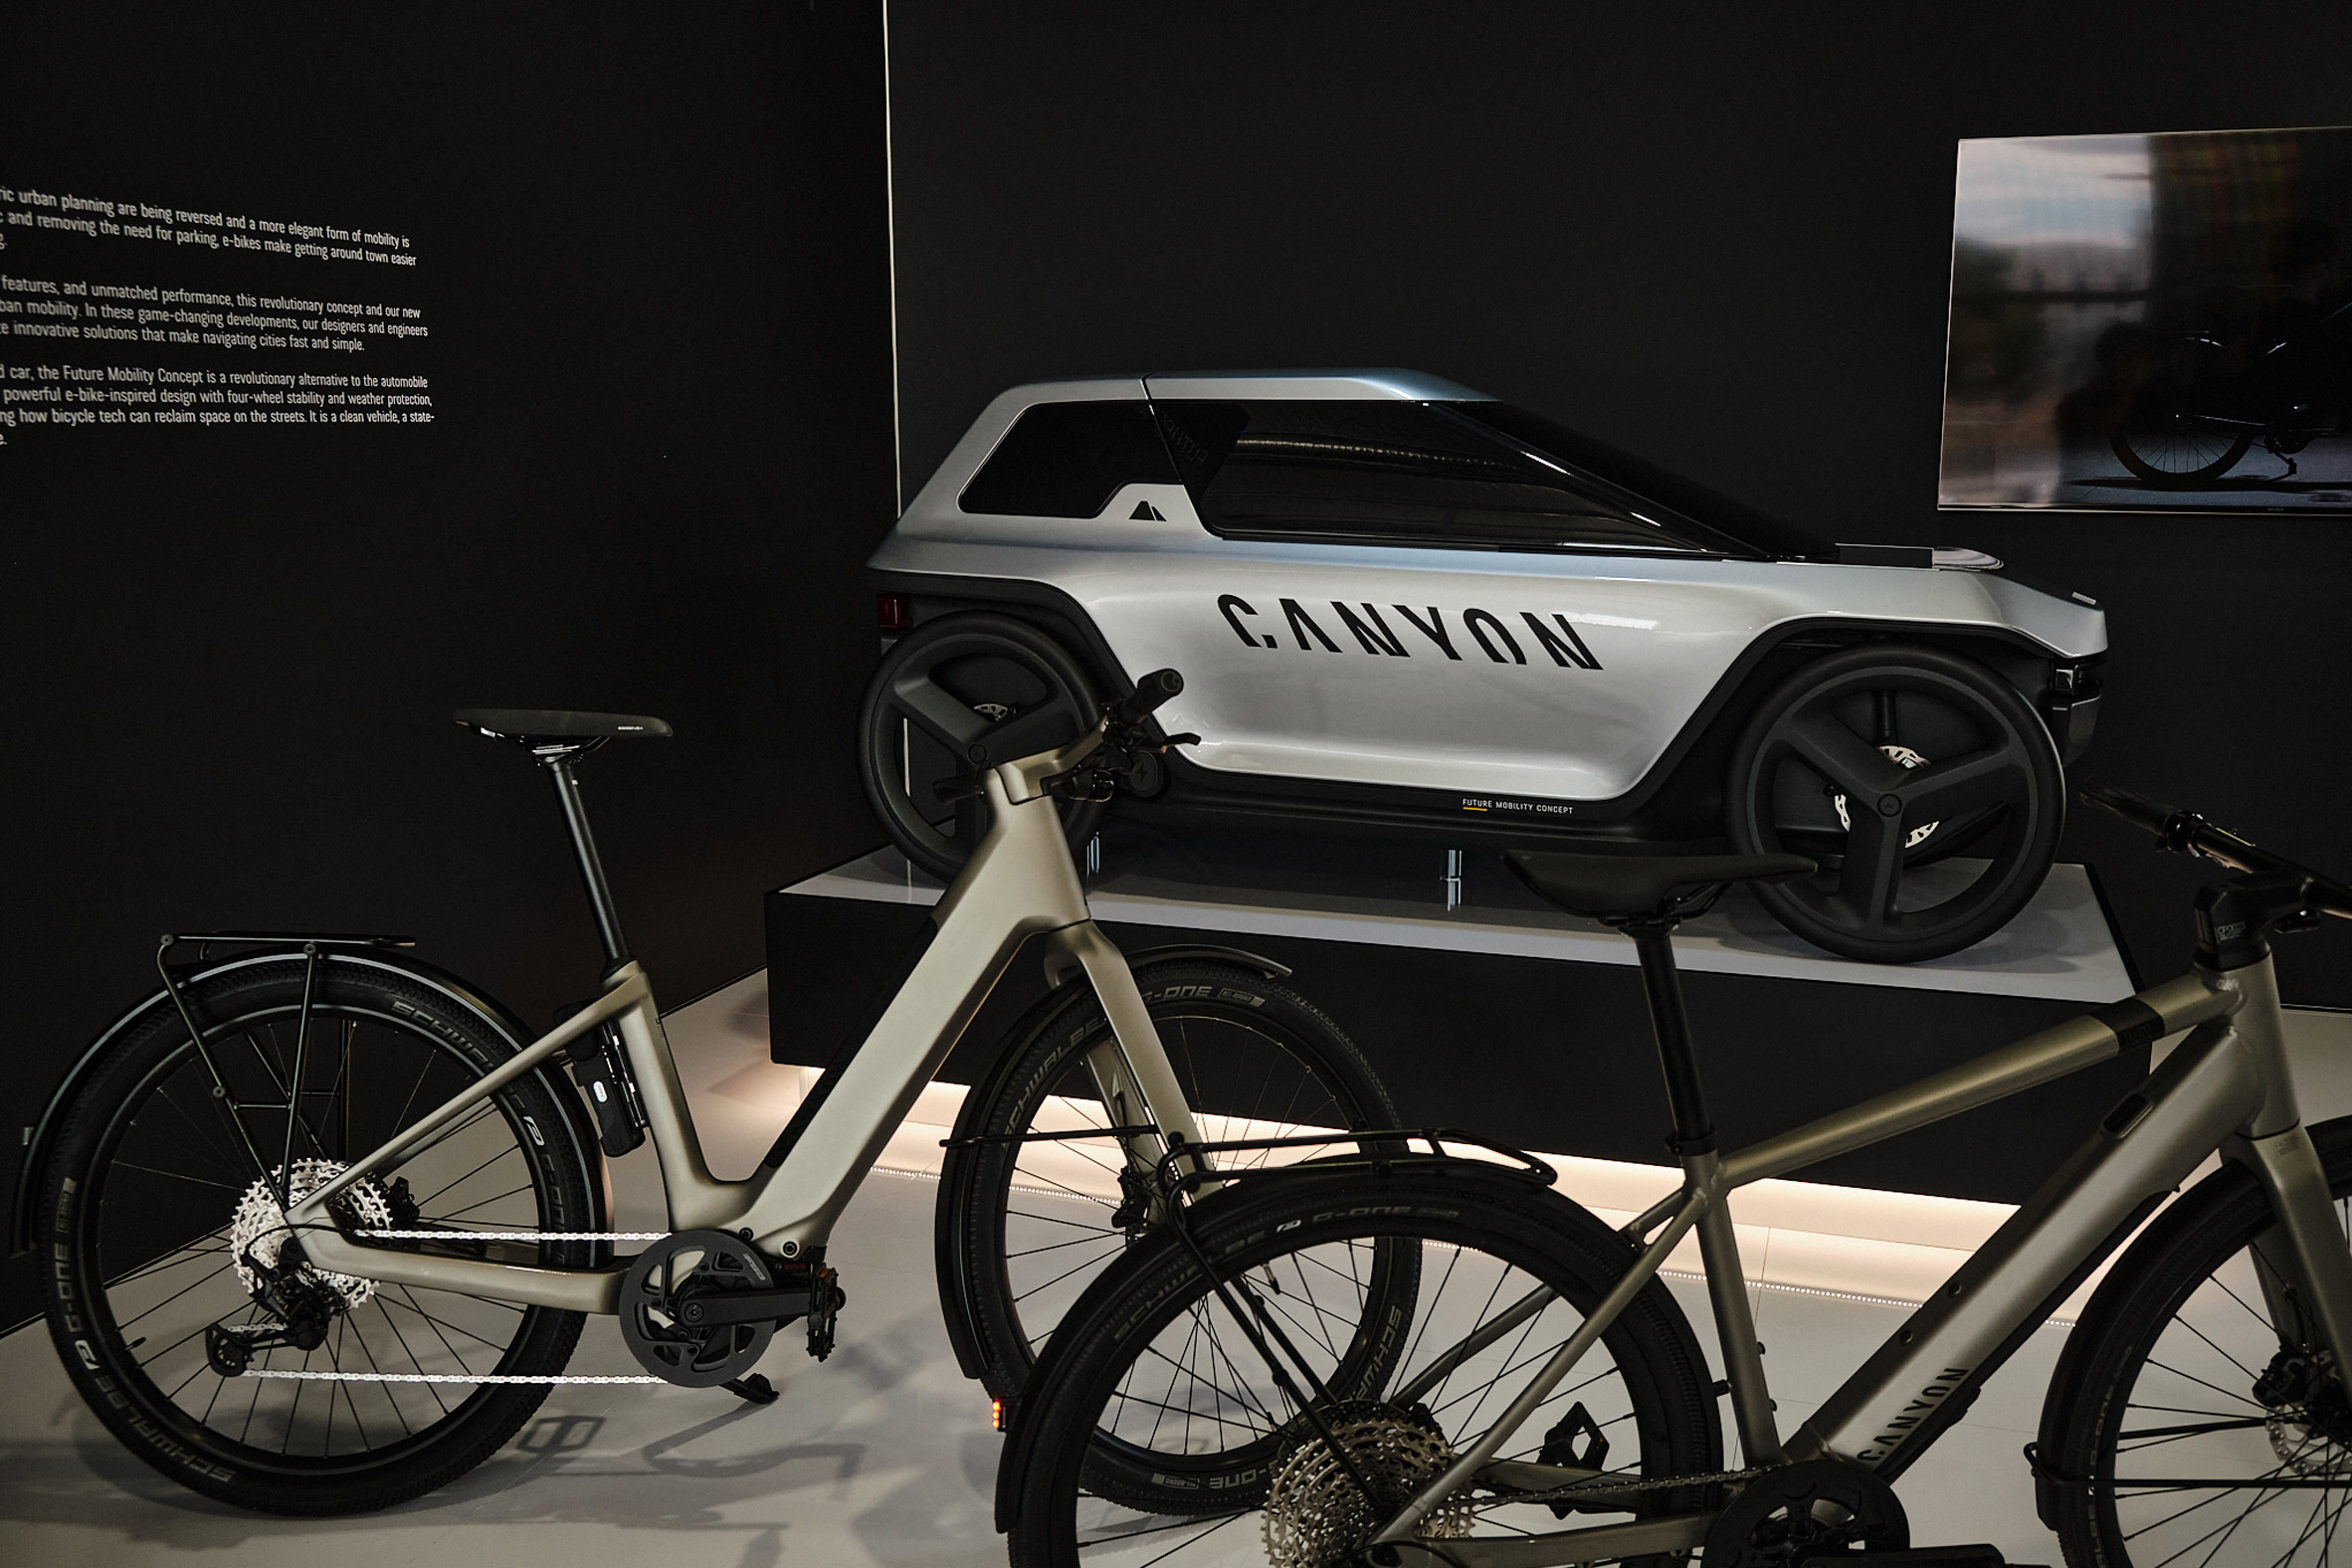 Canyon's Future Mobility Concept is on view in the brand's Koblenz showroom